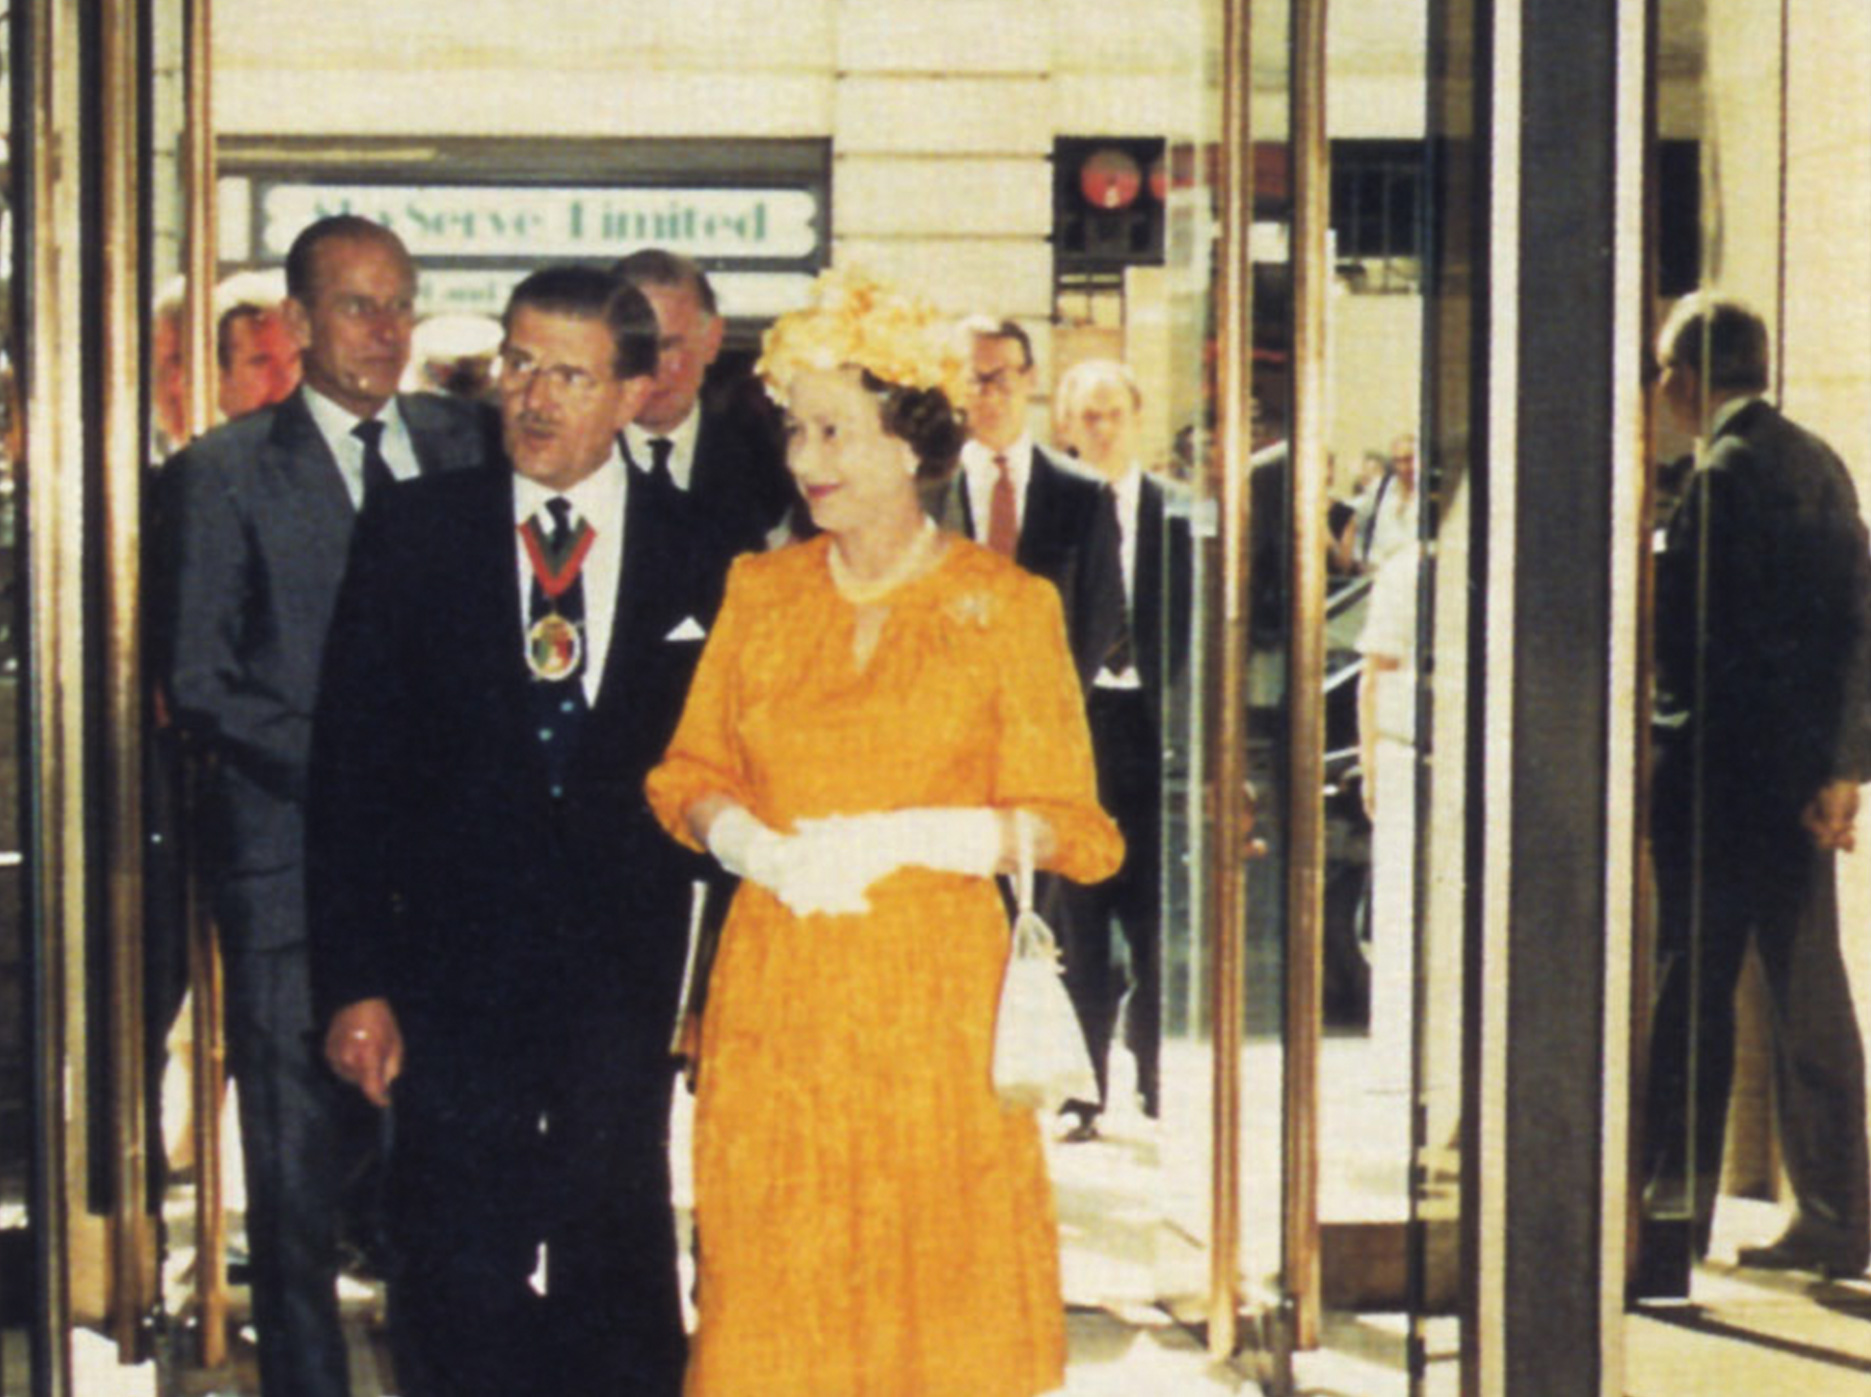 Queen Elizabeth II became the RSM's Patron on her accession to the throne in 1952 and in 1986 she visited the Society with Prince Philip, Duke of Edinburgh to open the newly expanded and modernised premises.